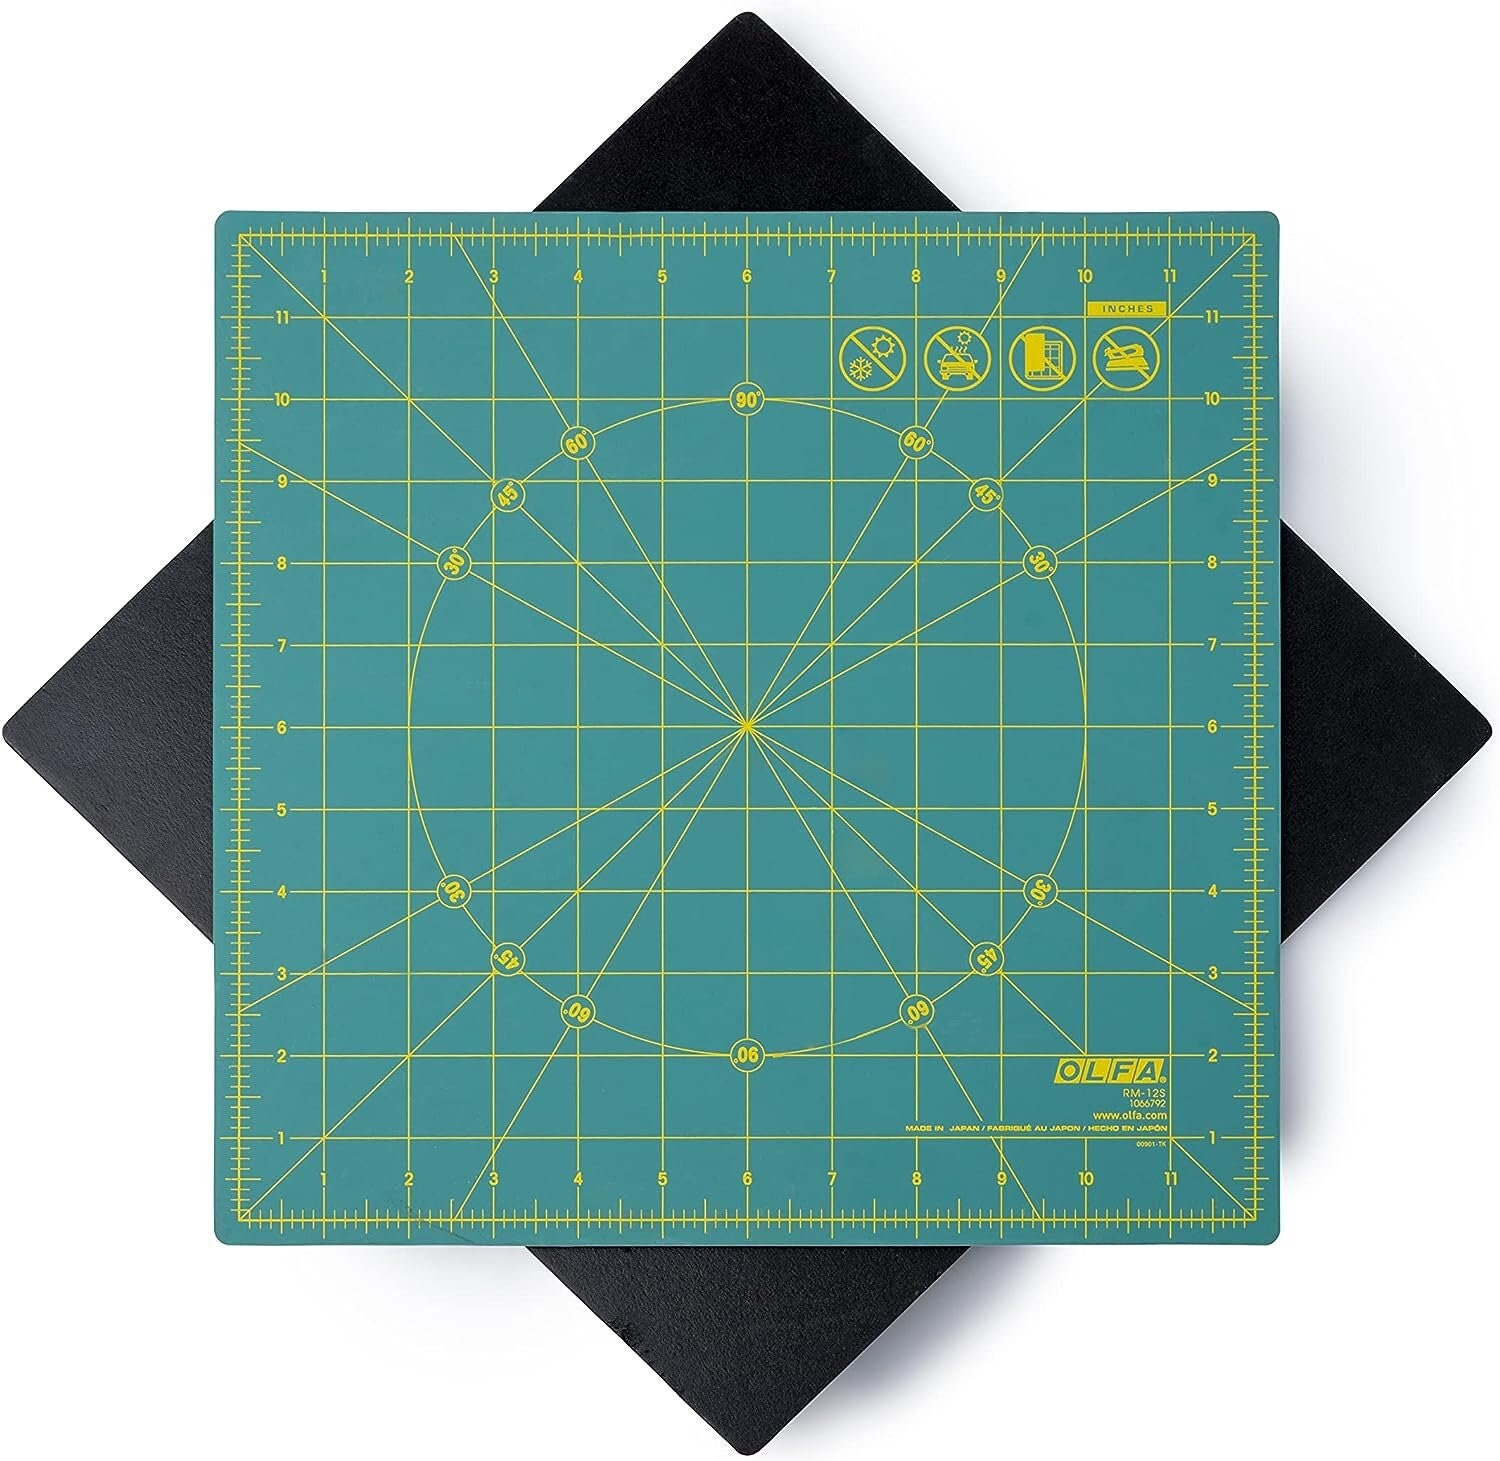 OLFA 6 x 8 Self Healing Rotary Cutting Mat (RM-6x8) - Double Sided 6x8  Inch Cutting Mat with Grid for Quilting, Sewing, Fabric, & Crafts, Designed